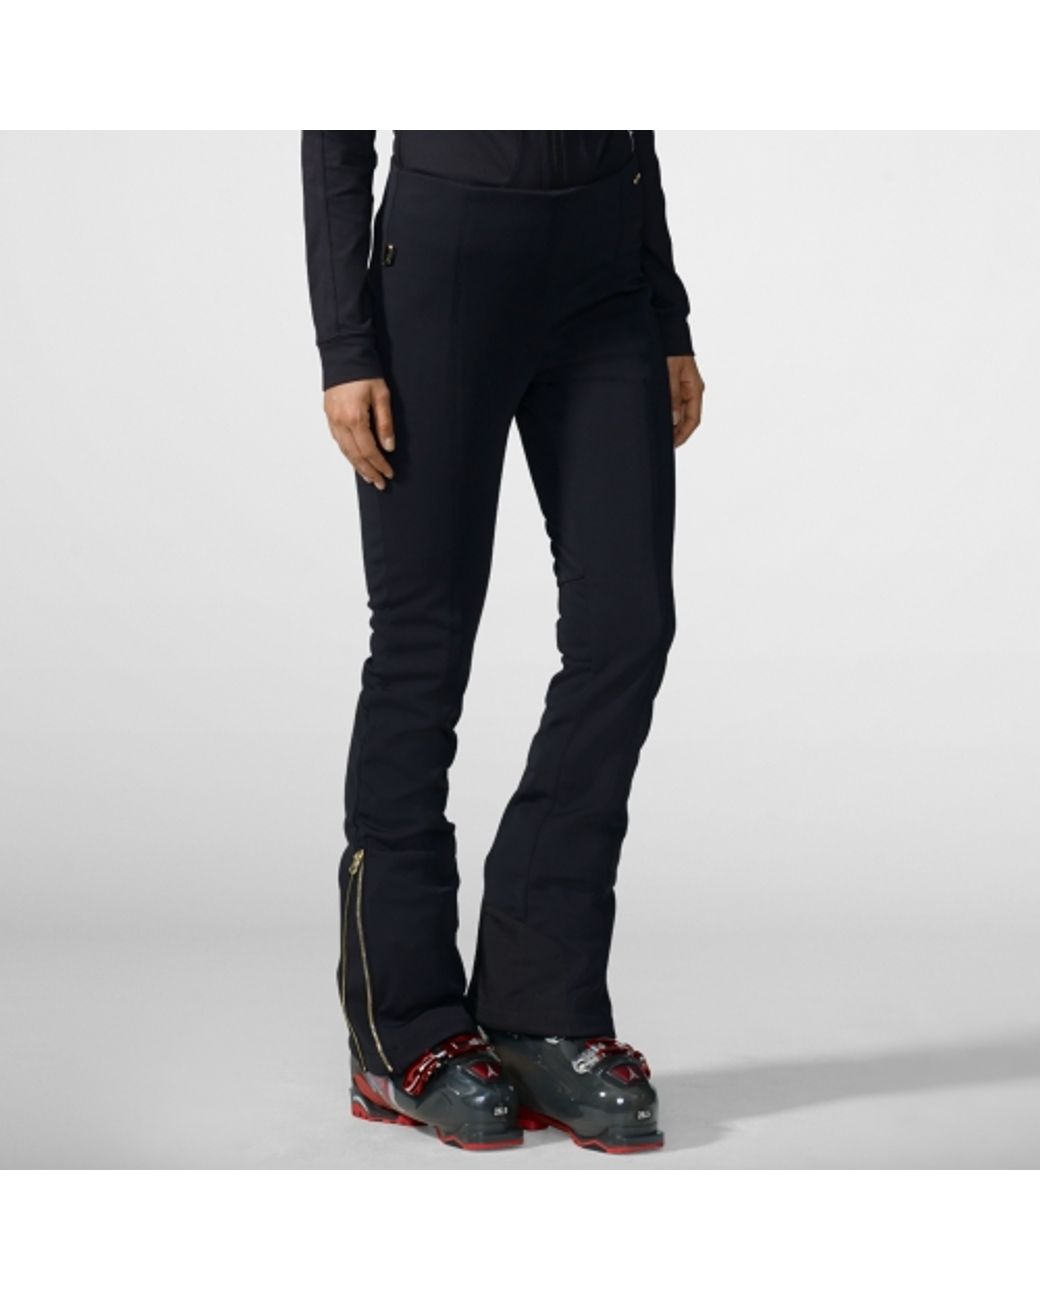 Stretch Fitted Ski Pants in Scarlet Red